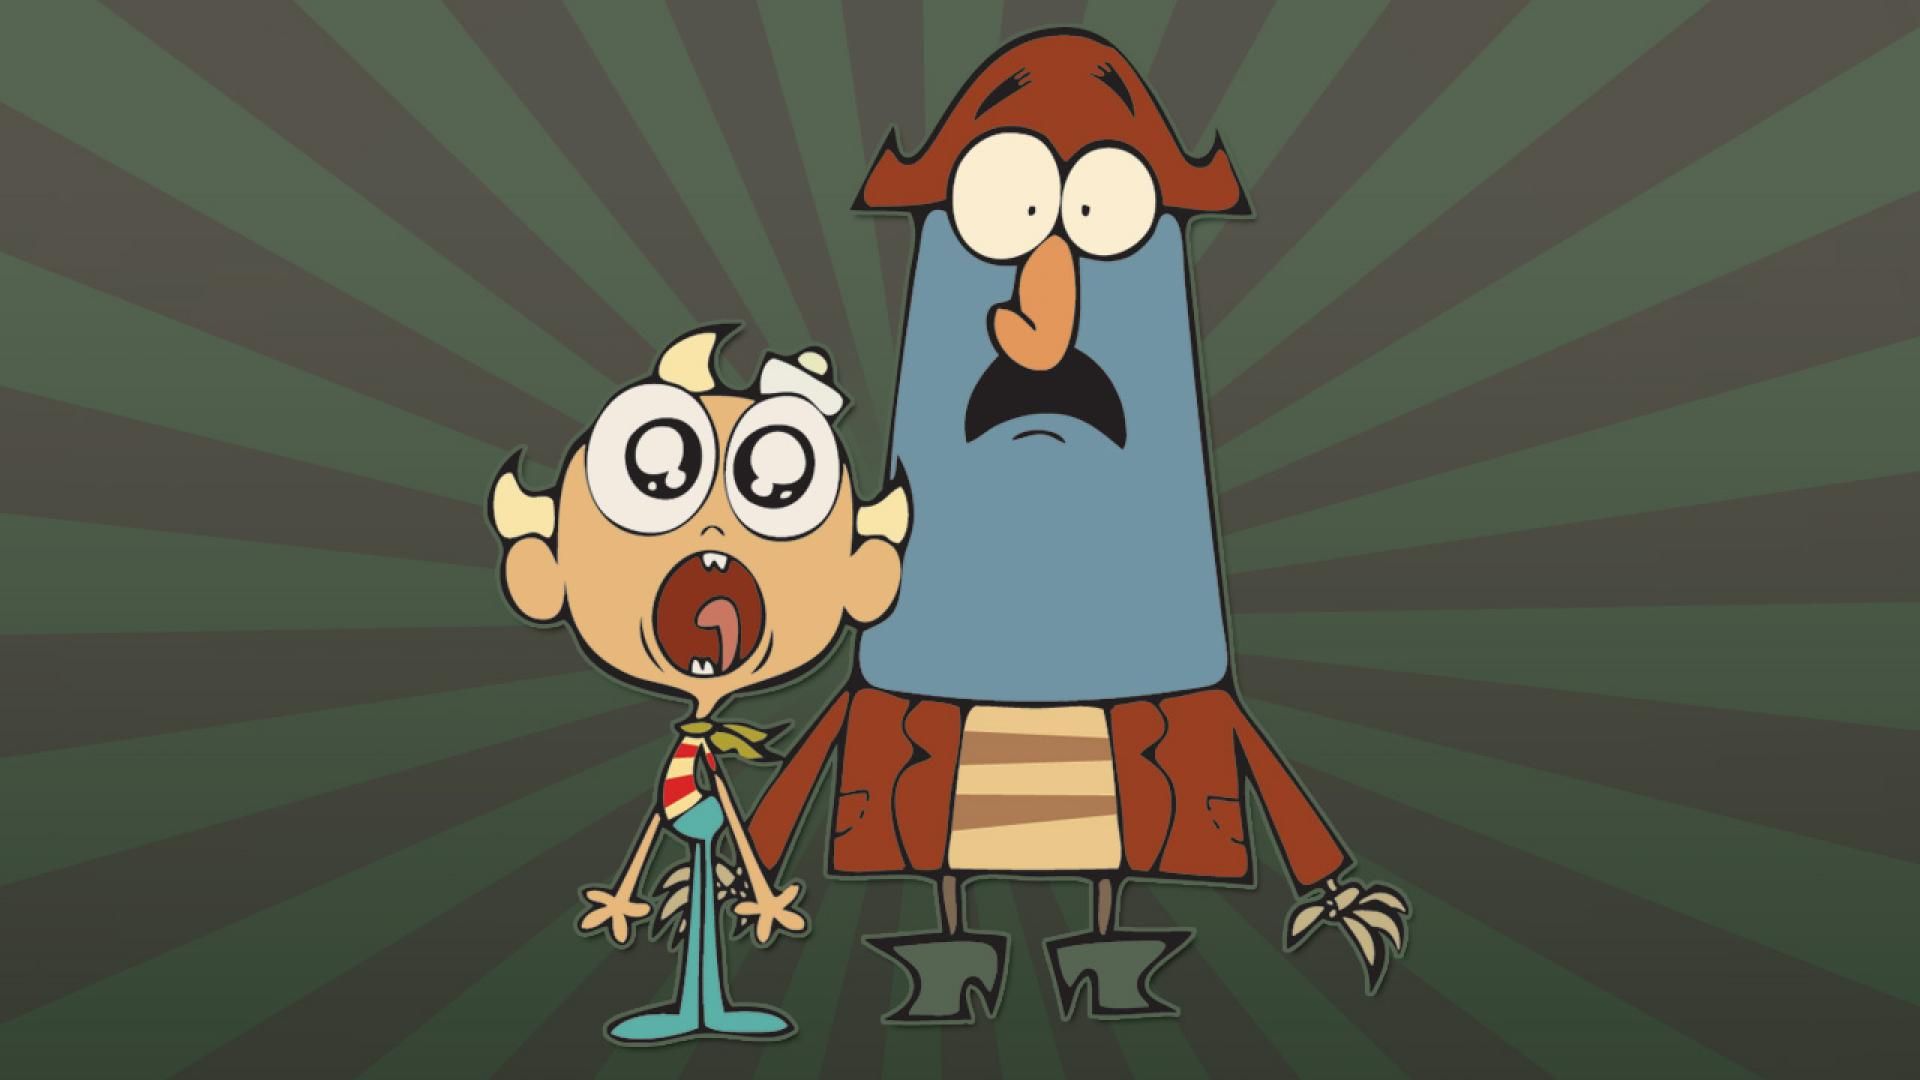 Flapjack cartoons wallpaper - (#177881) - High Quality and ...